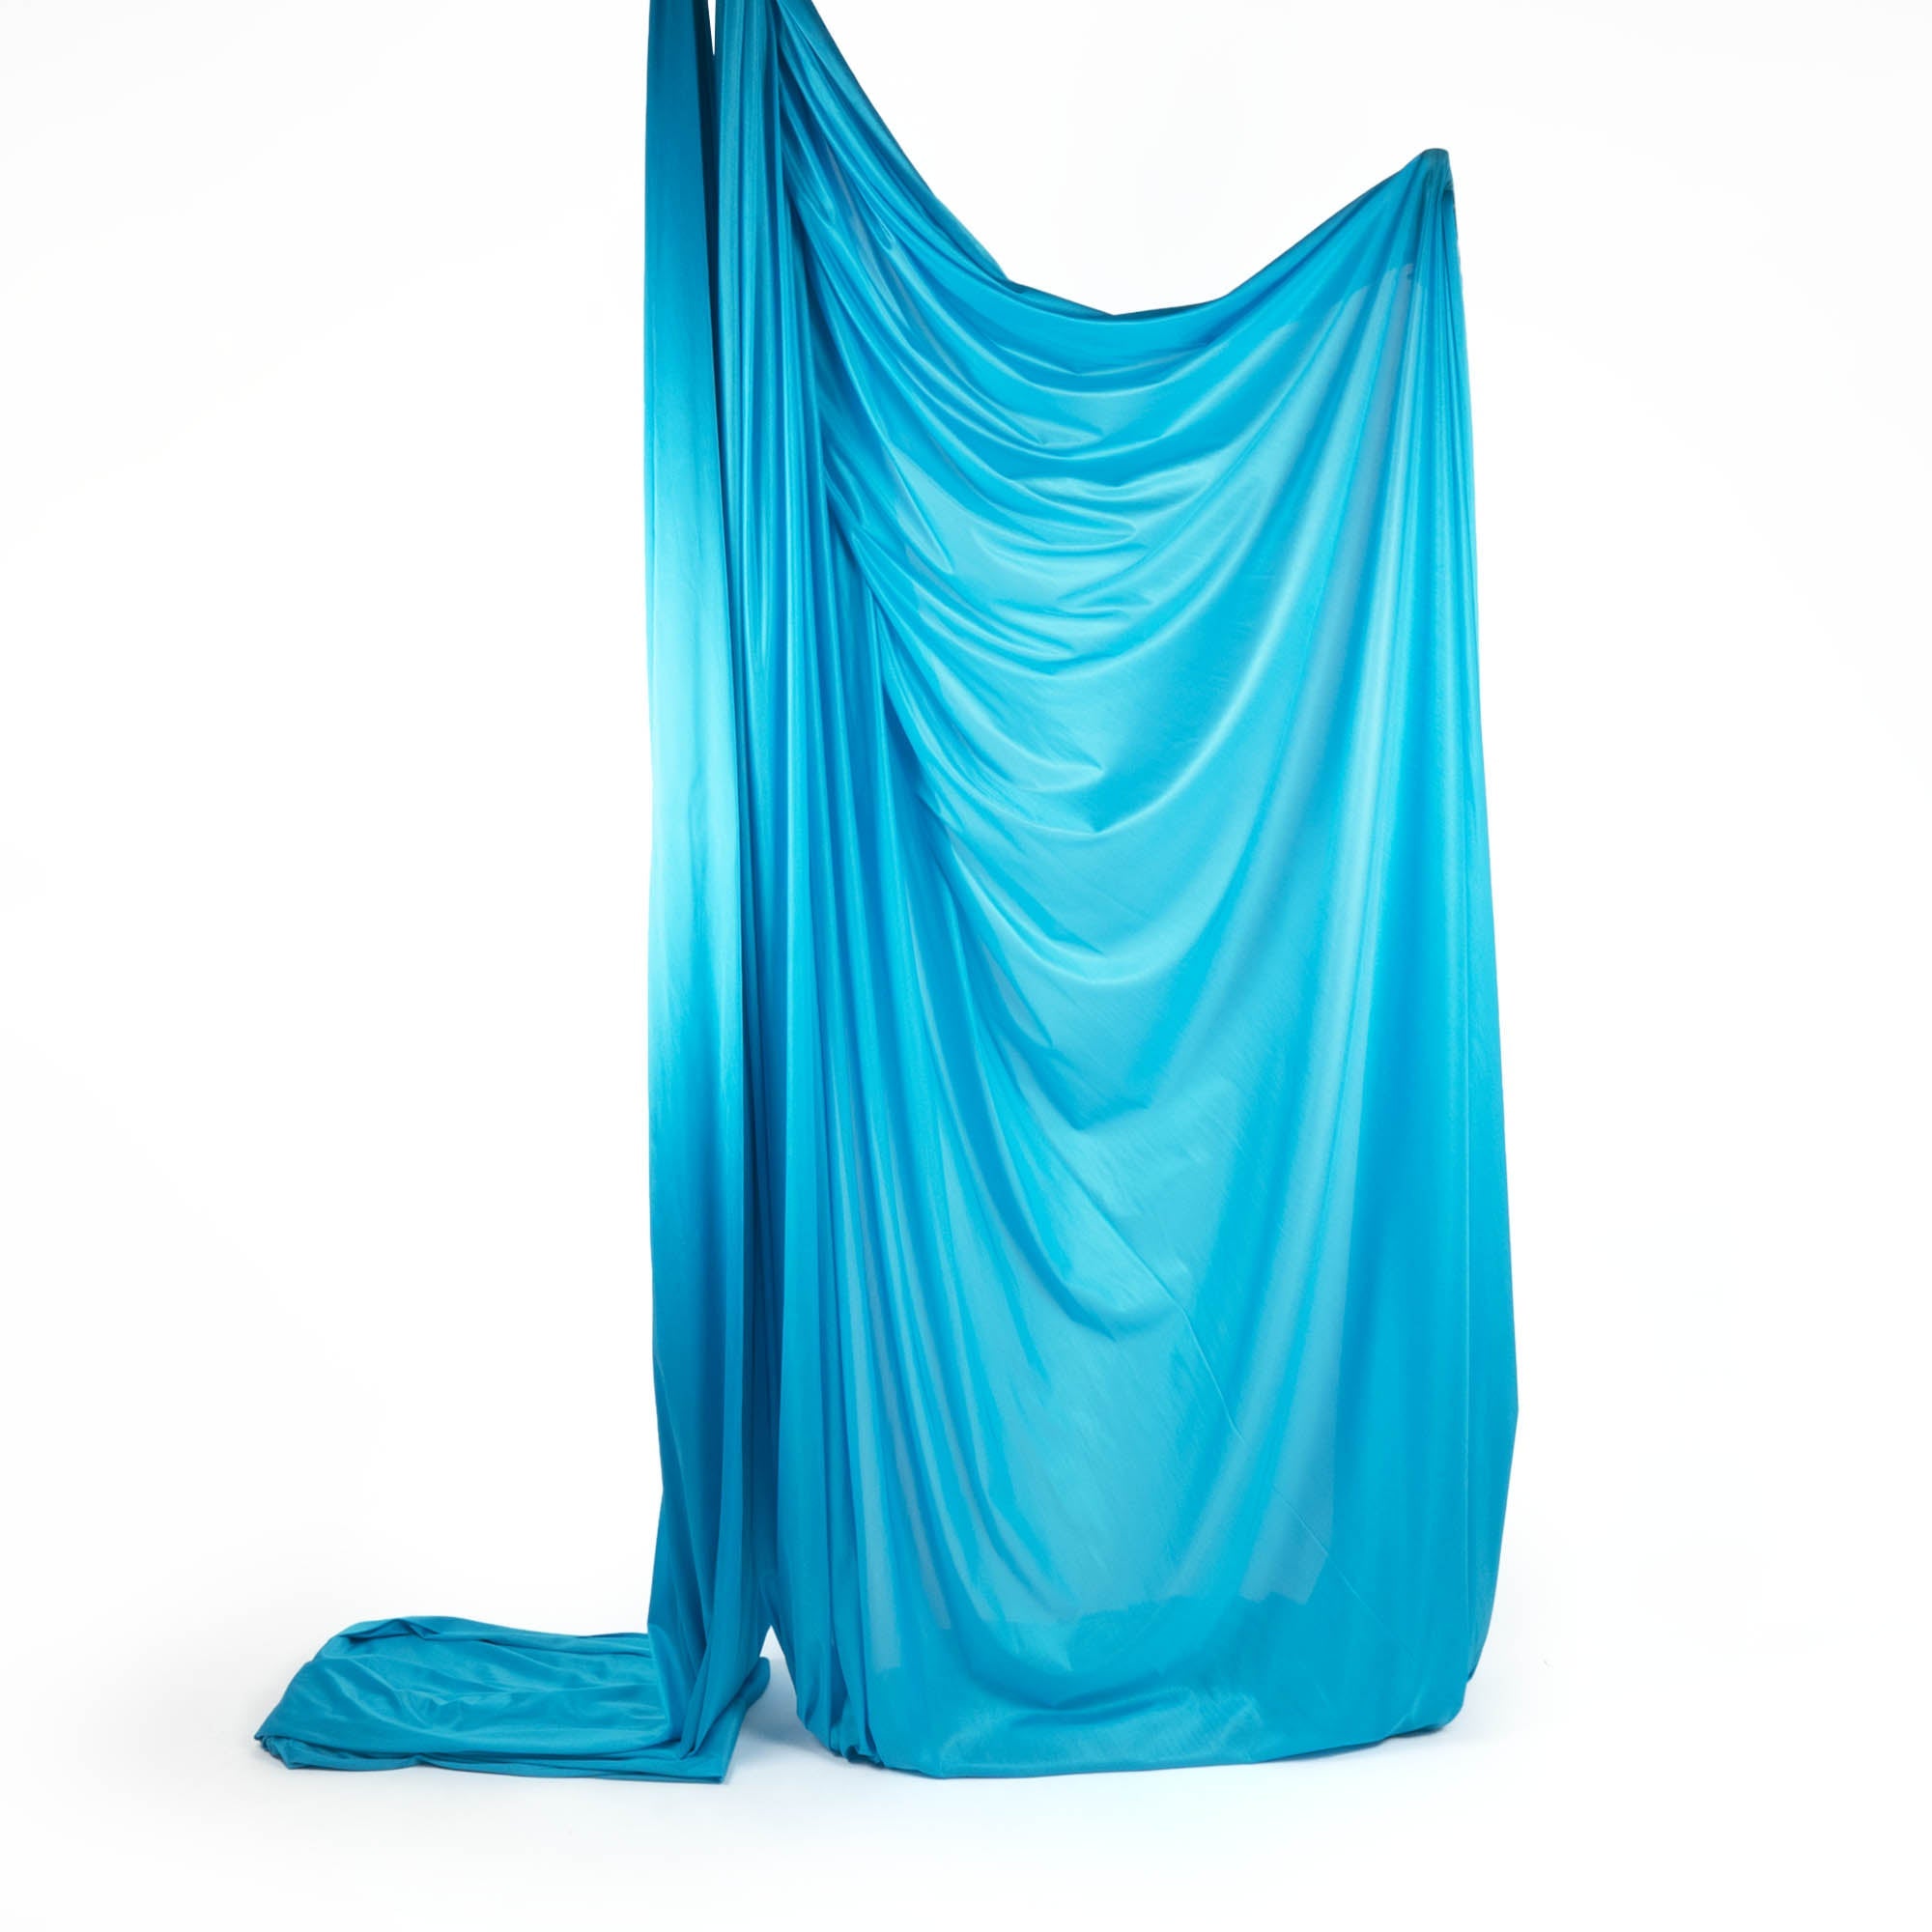 Turquoise rigged silk